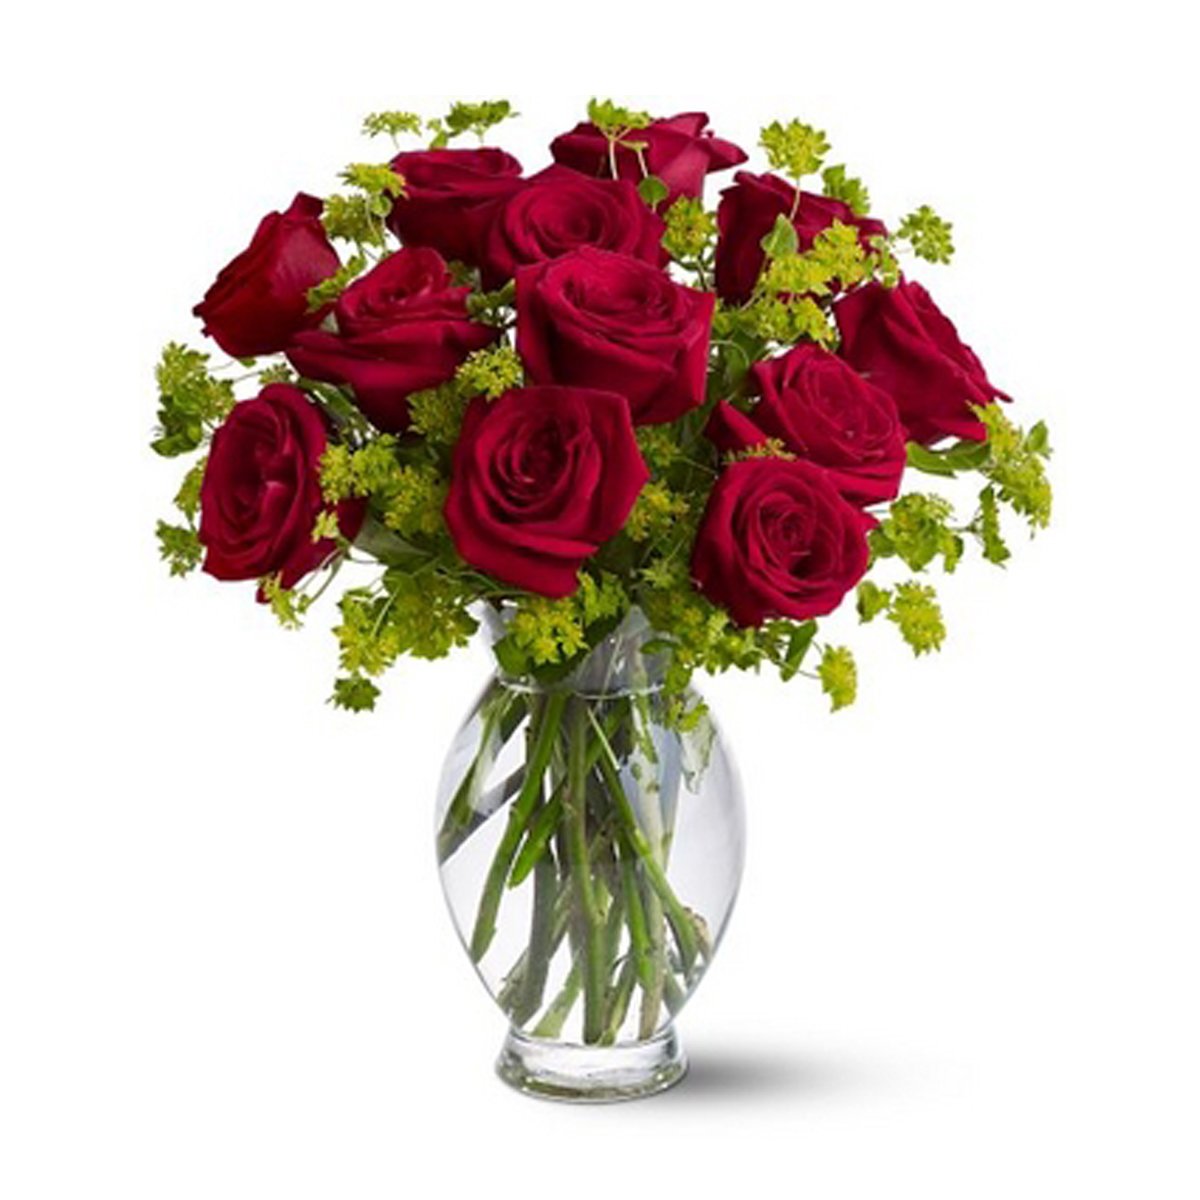 12 Red Roses In A Glass Vase